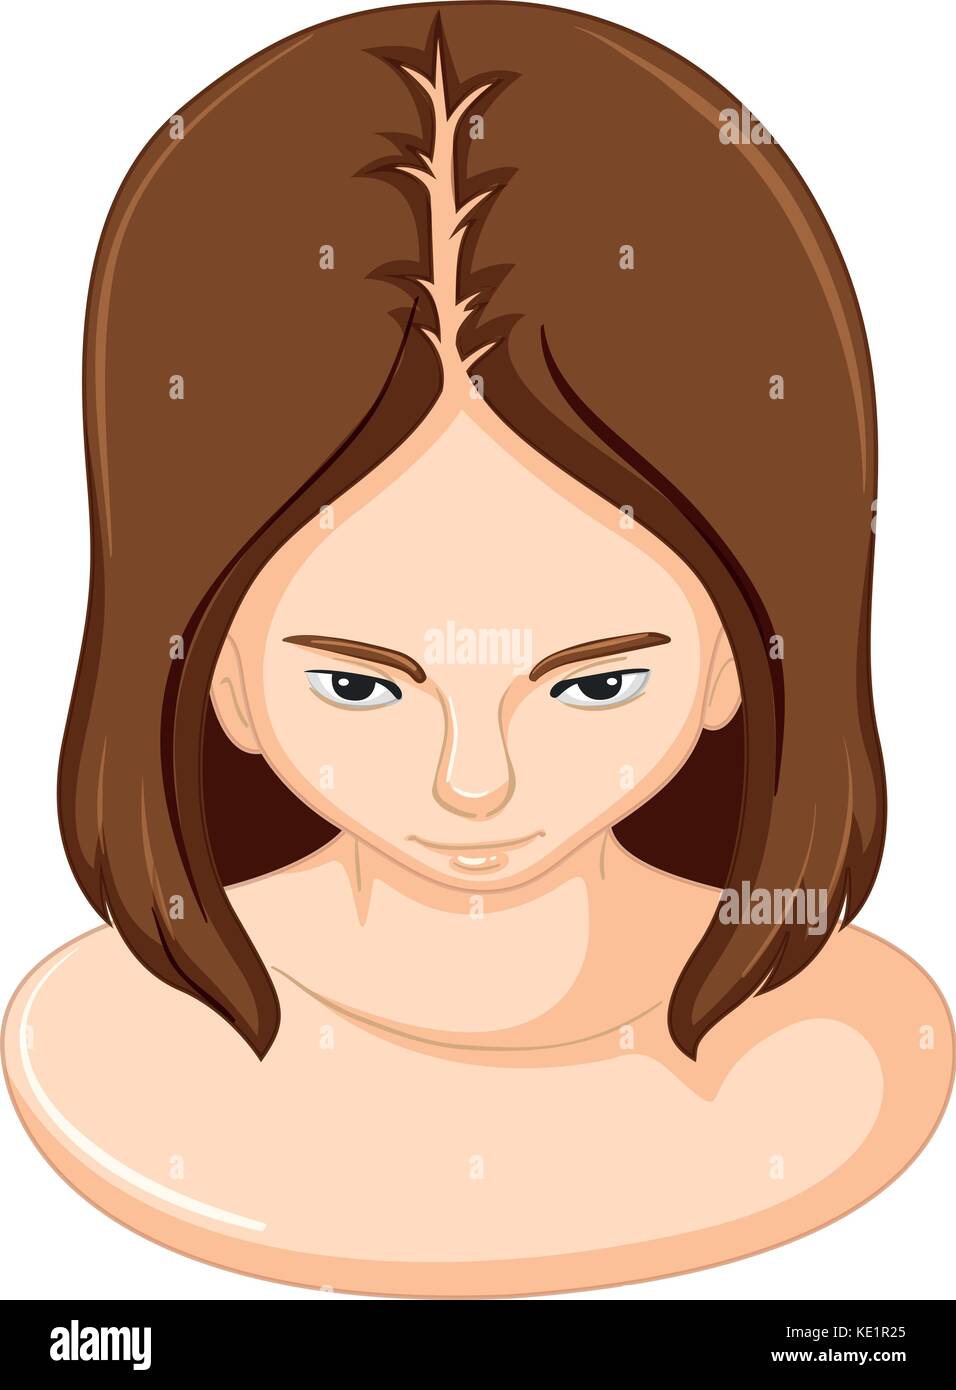 Woman and hair lossing illustration Stock Vector